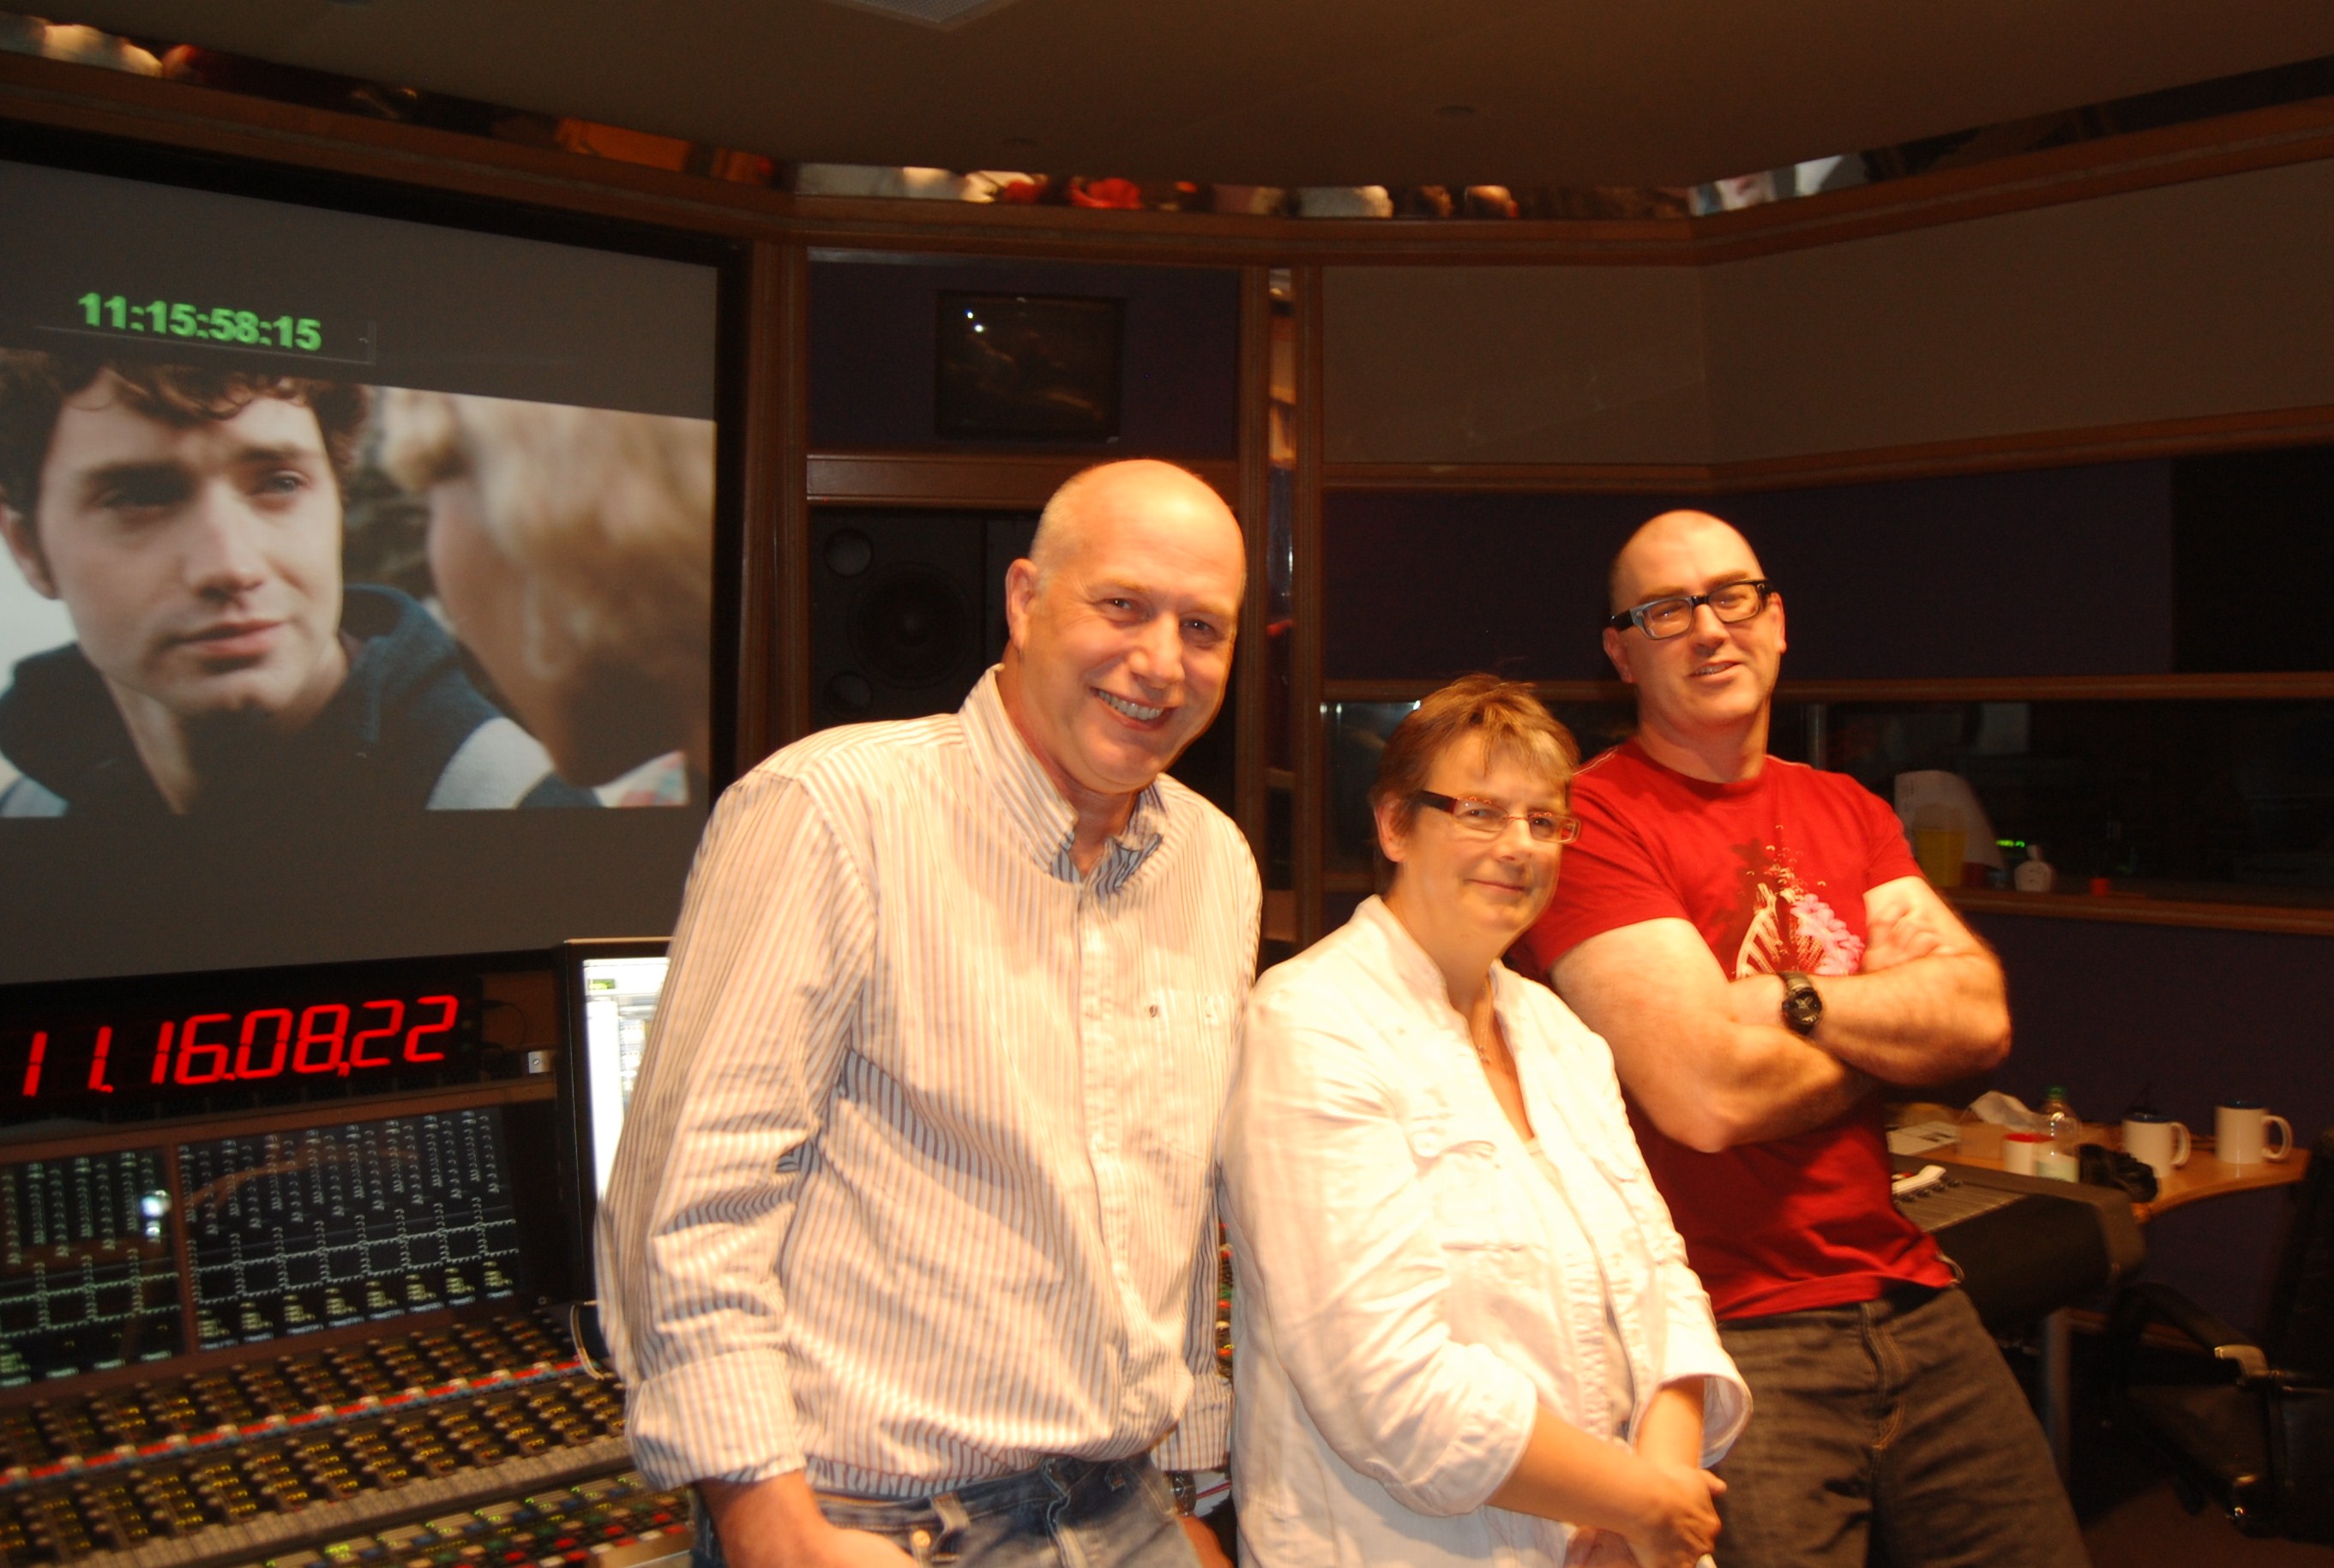 Theatrical mix completed on the movie 'Here and Now', at AIR Lyndhurst, London; September 7th 2013. Mixers Neil Hillman MPSE (L) and Pip Norton (C), with the film's Director, Lisle Turner (R).